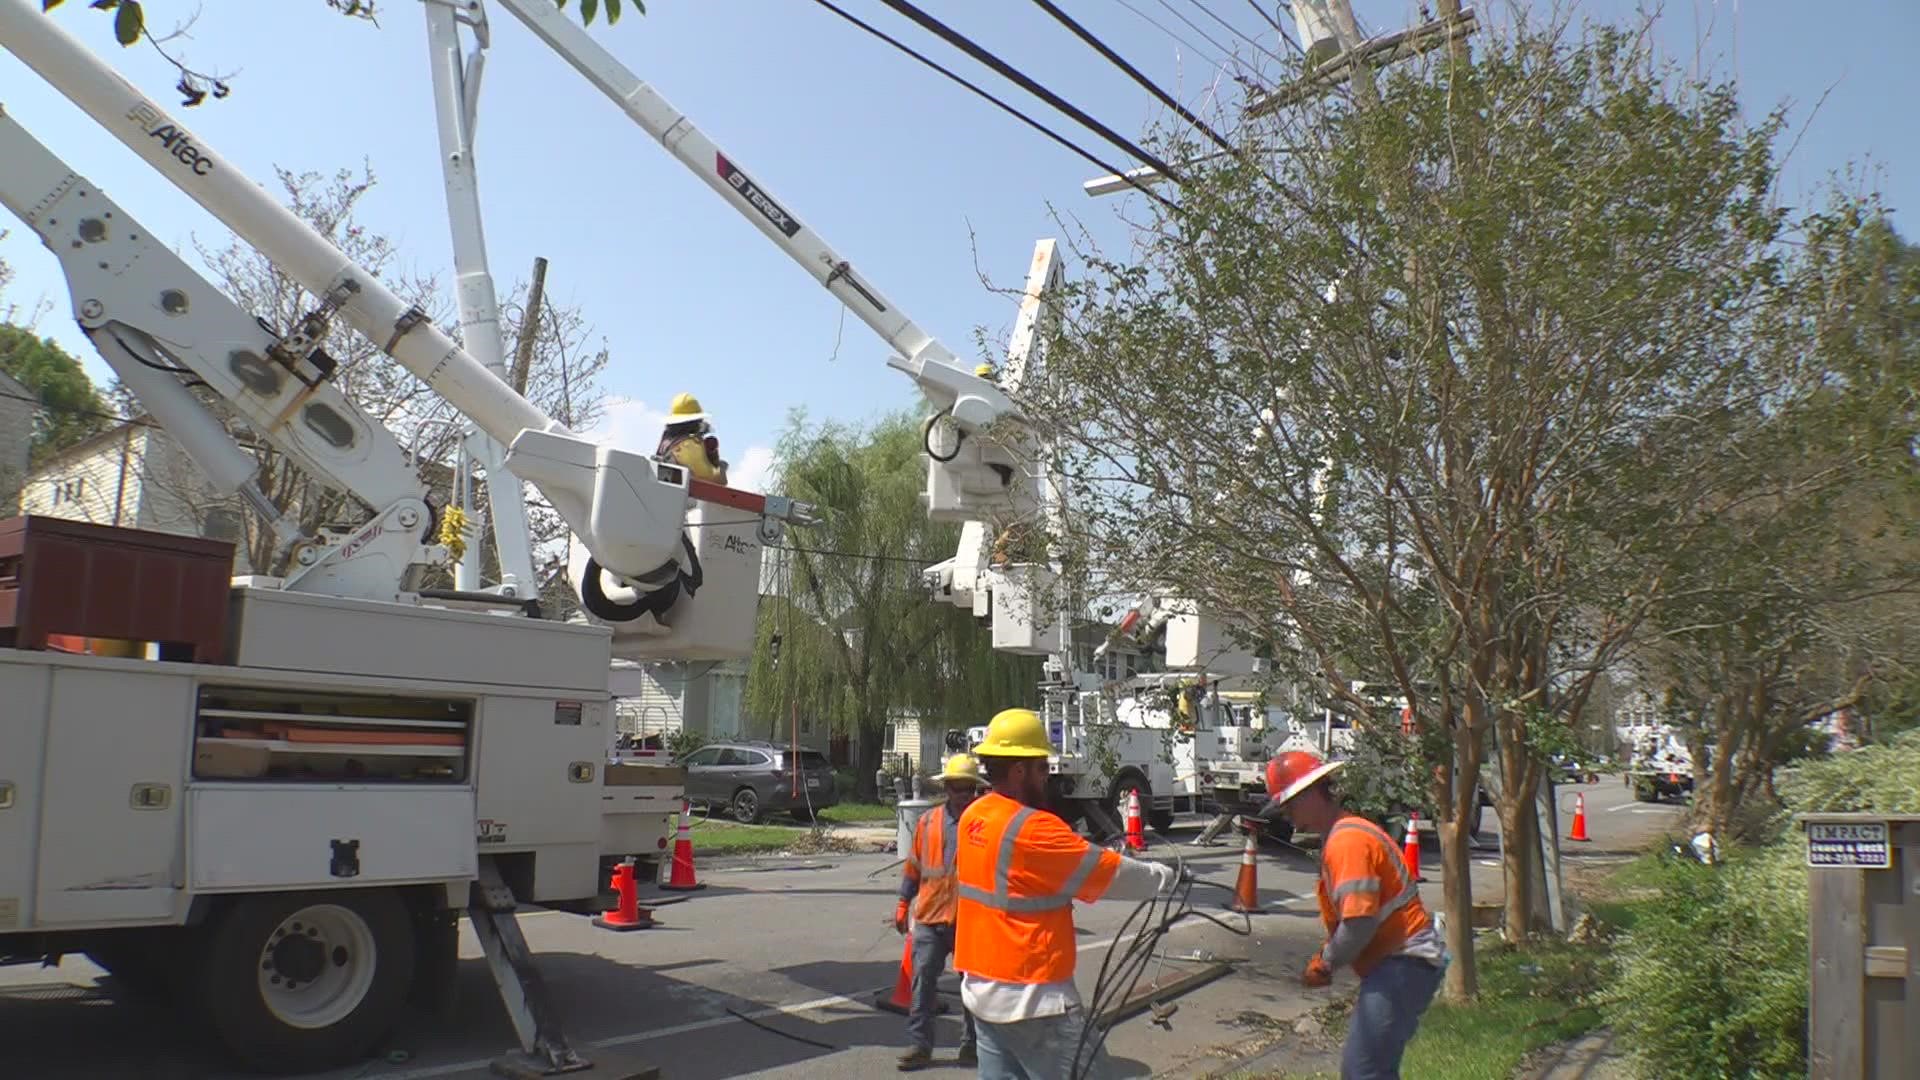 Residents get hopeful as they see crewmen working to restore the power to Louisiana after Hurricane Ida especially in the hardest hit areas.